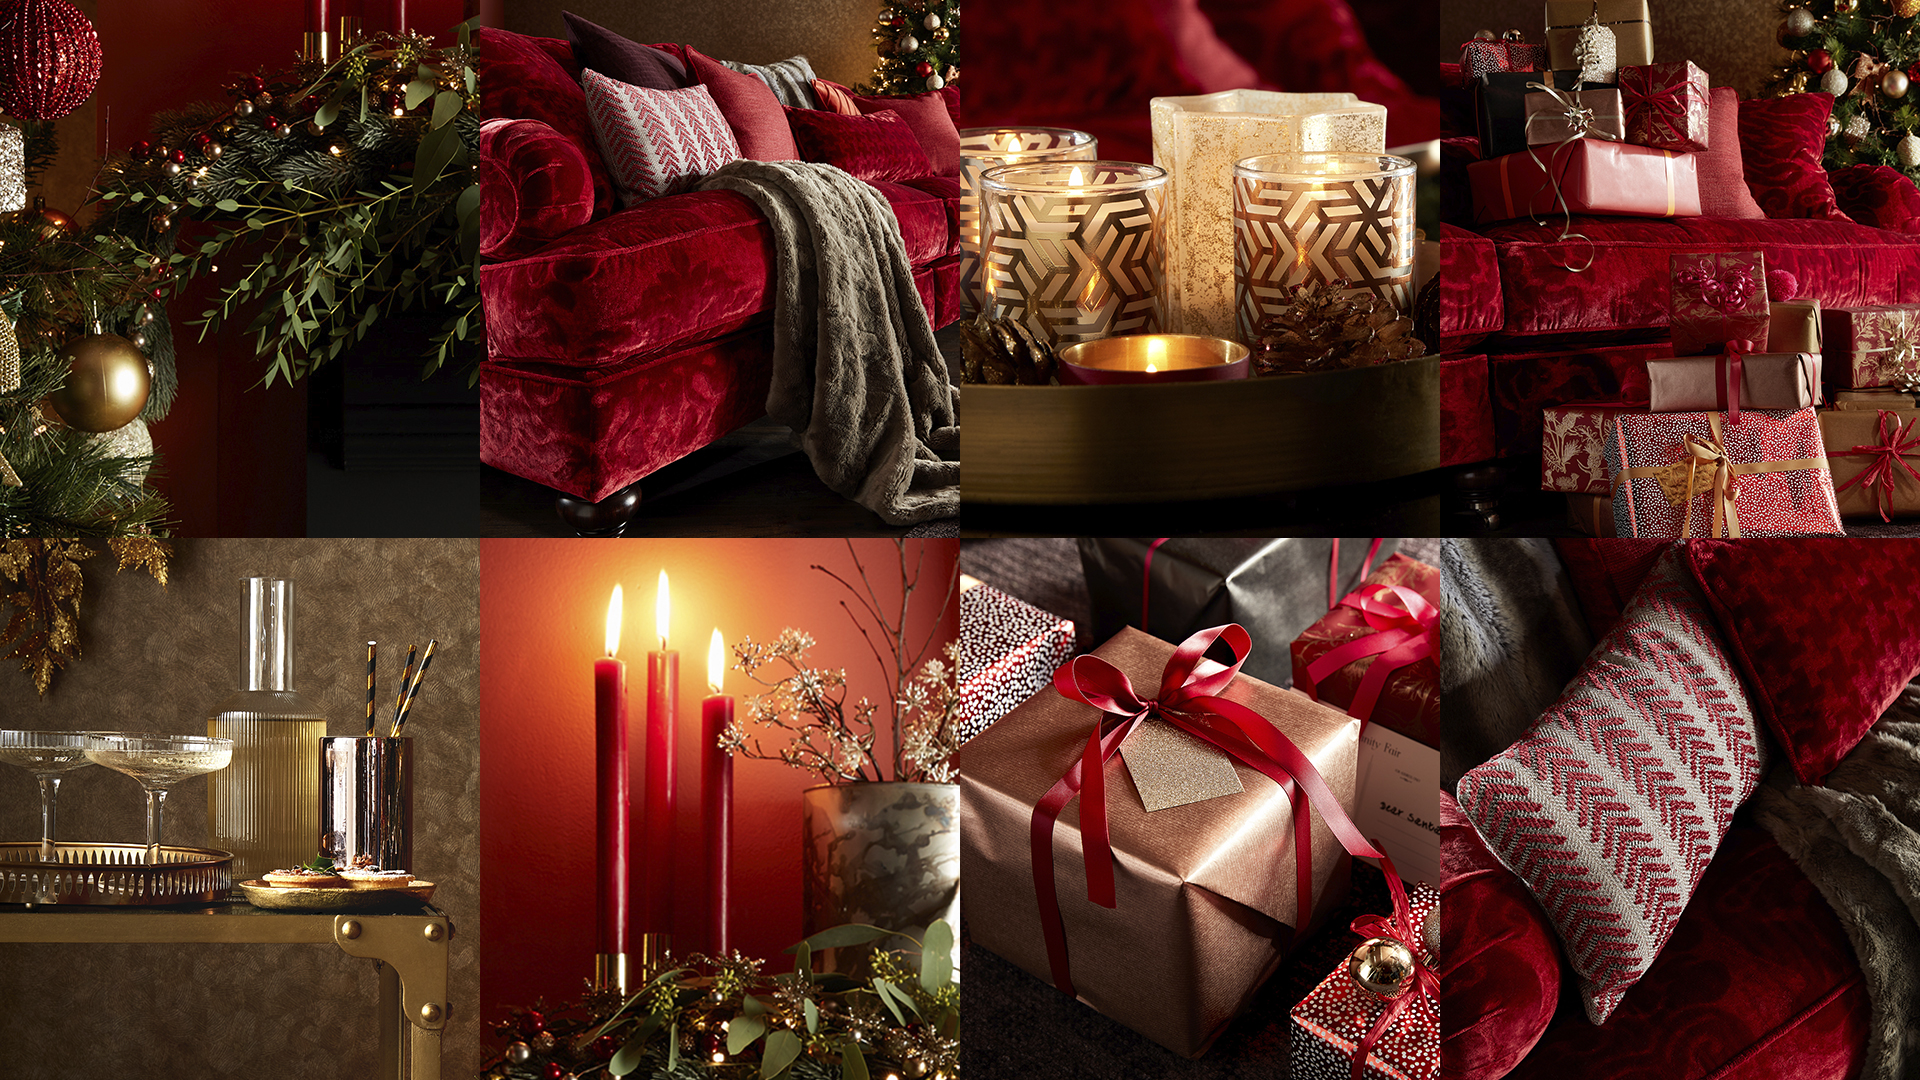 Creating some Christmas magic in your home